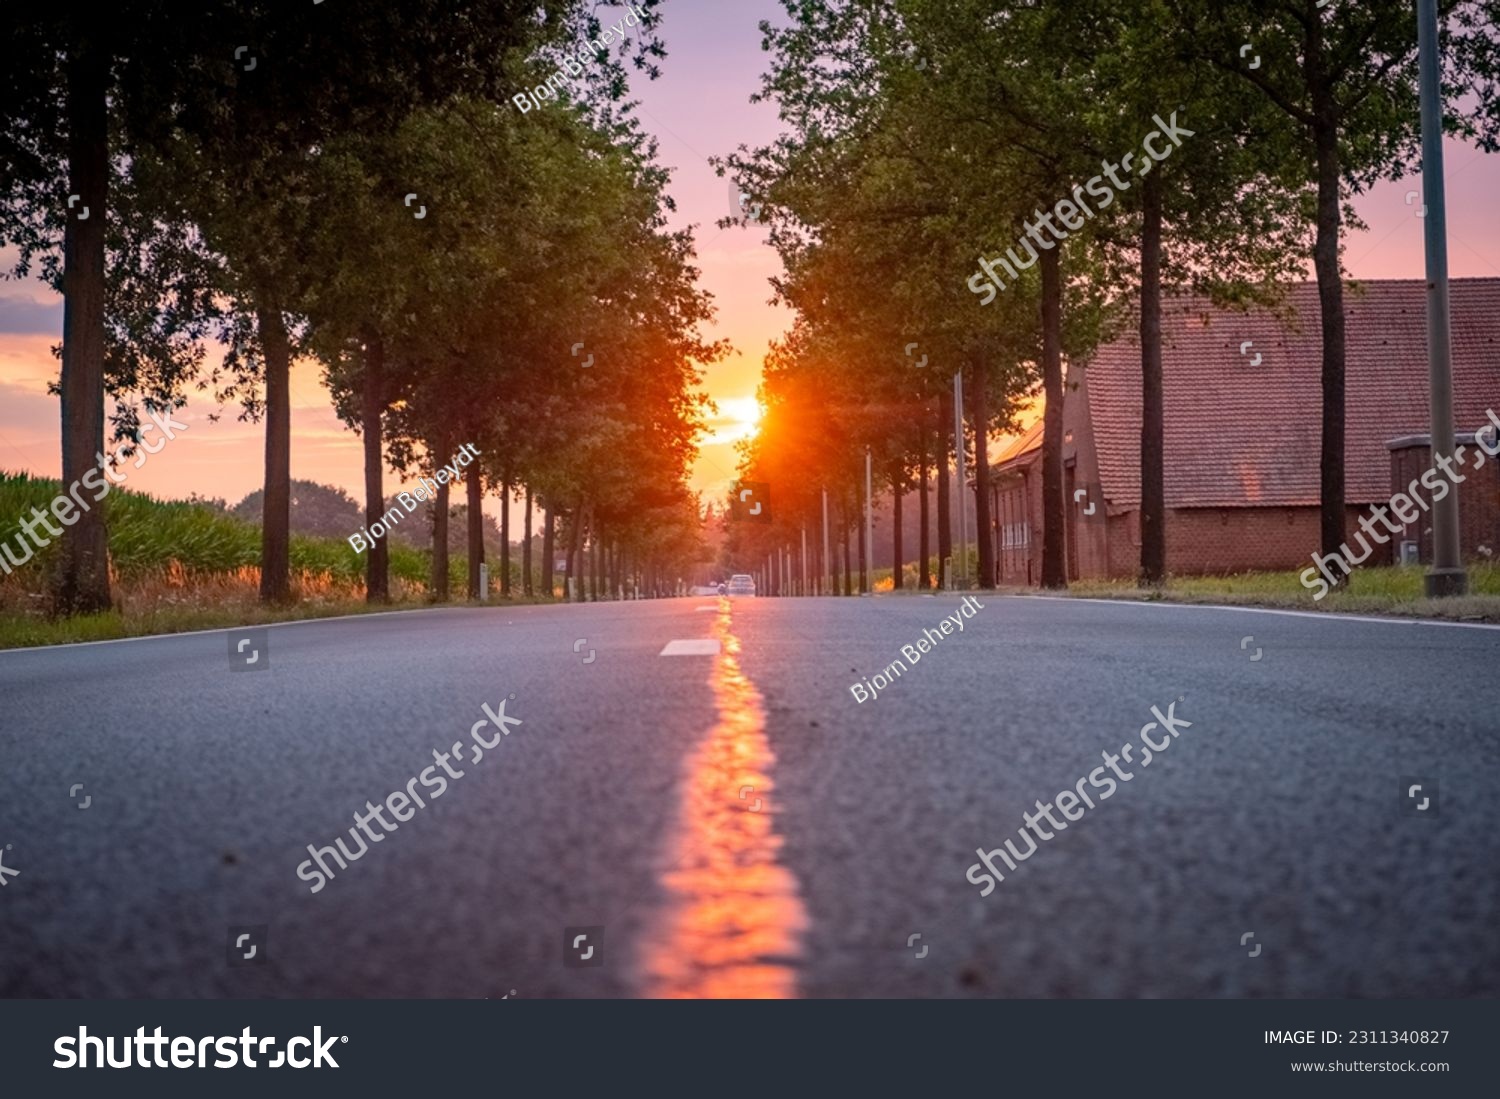 Sun Rising Over Asphalt Country Open Road In Sunny Morning Or Evening. Open Road In Europe In Summer Or Autumn Season At Sunny Sunset Or Sunrise Time. High quality photo #2311340827